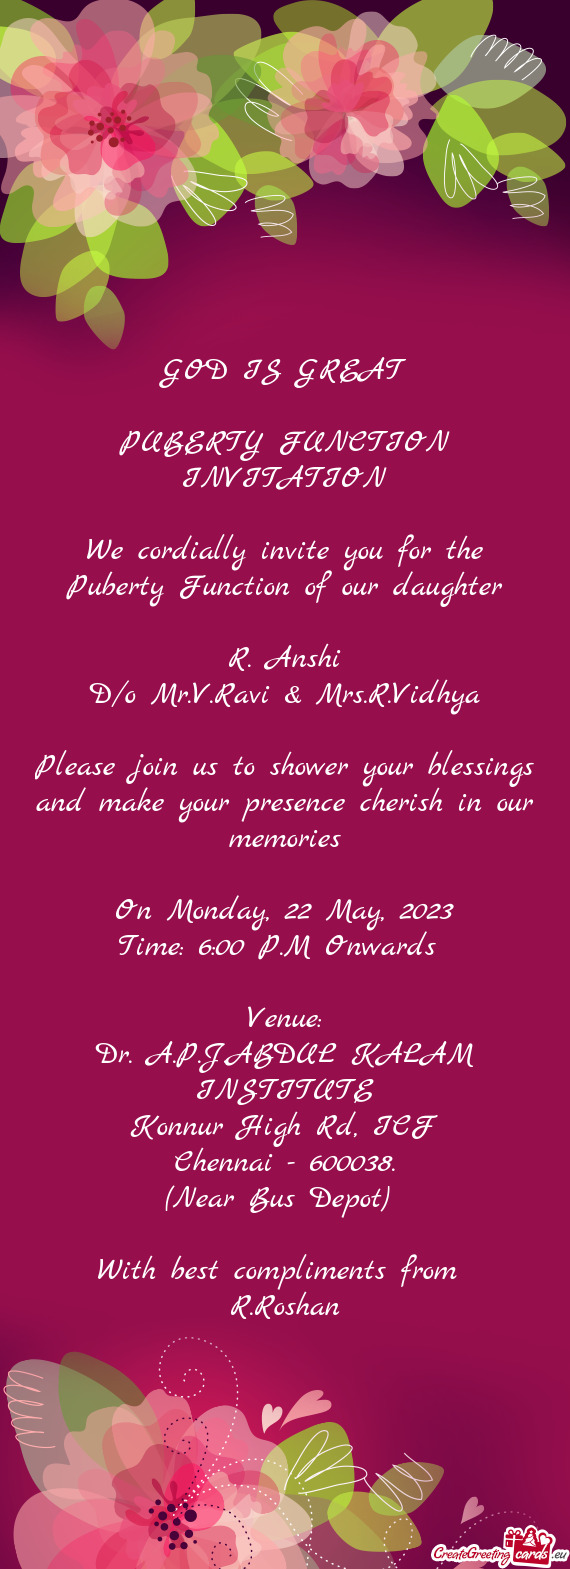 Please join us to shower your blessings and make your presence cherish in our memories